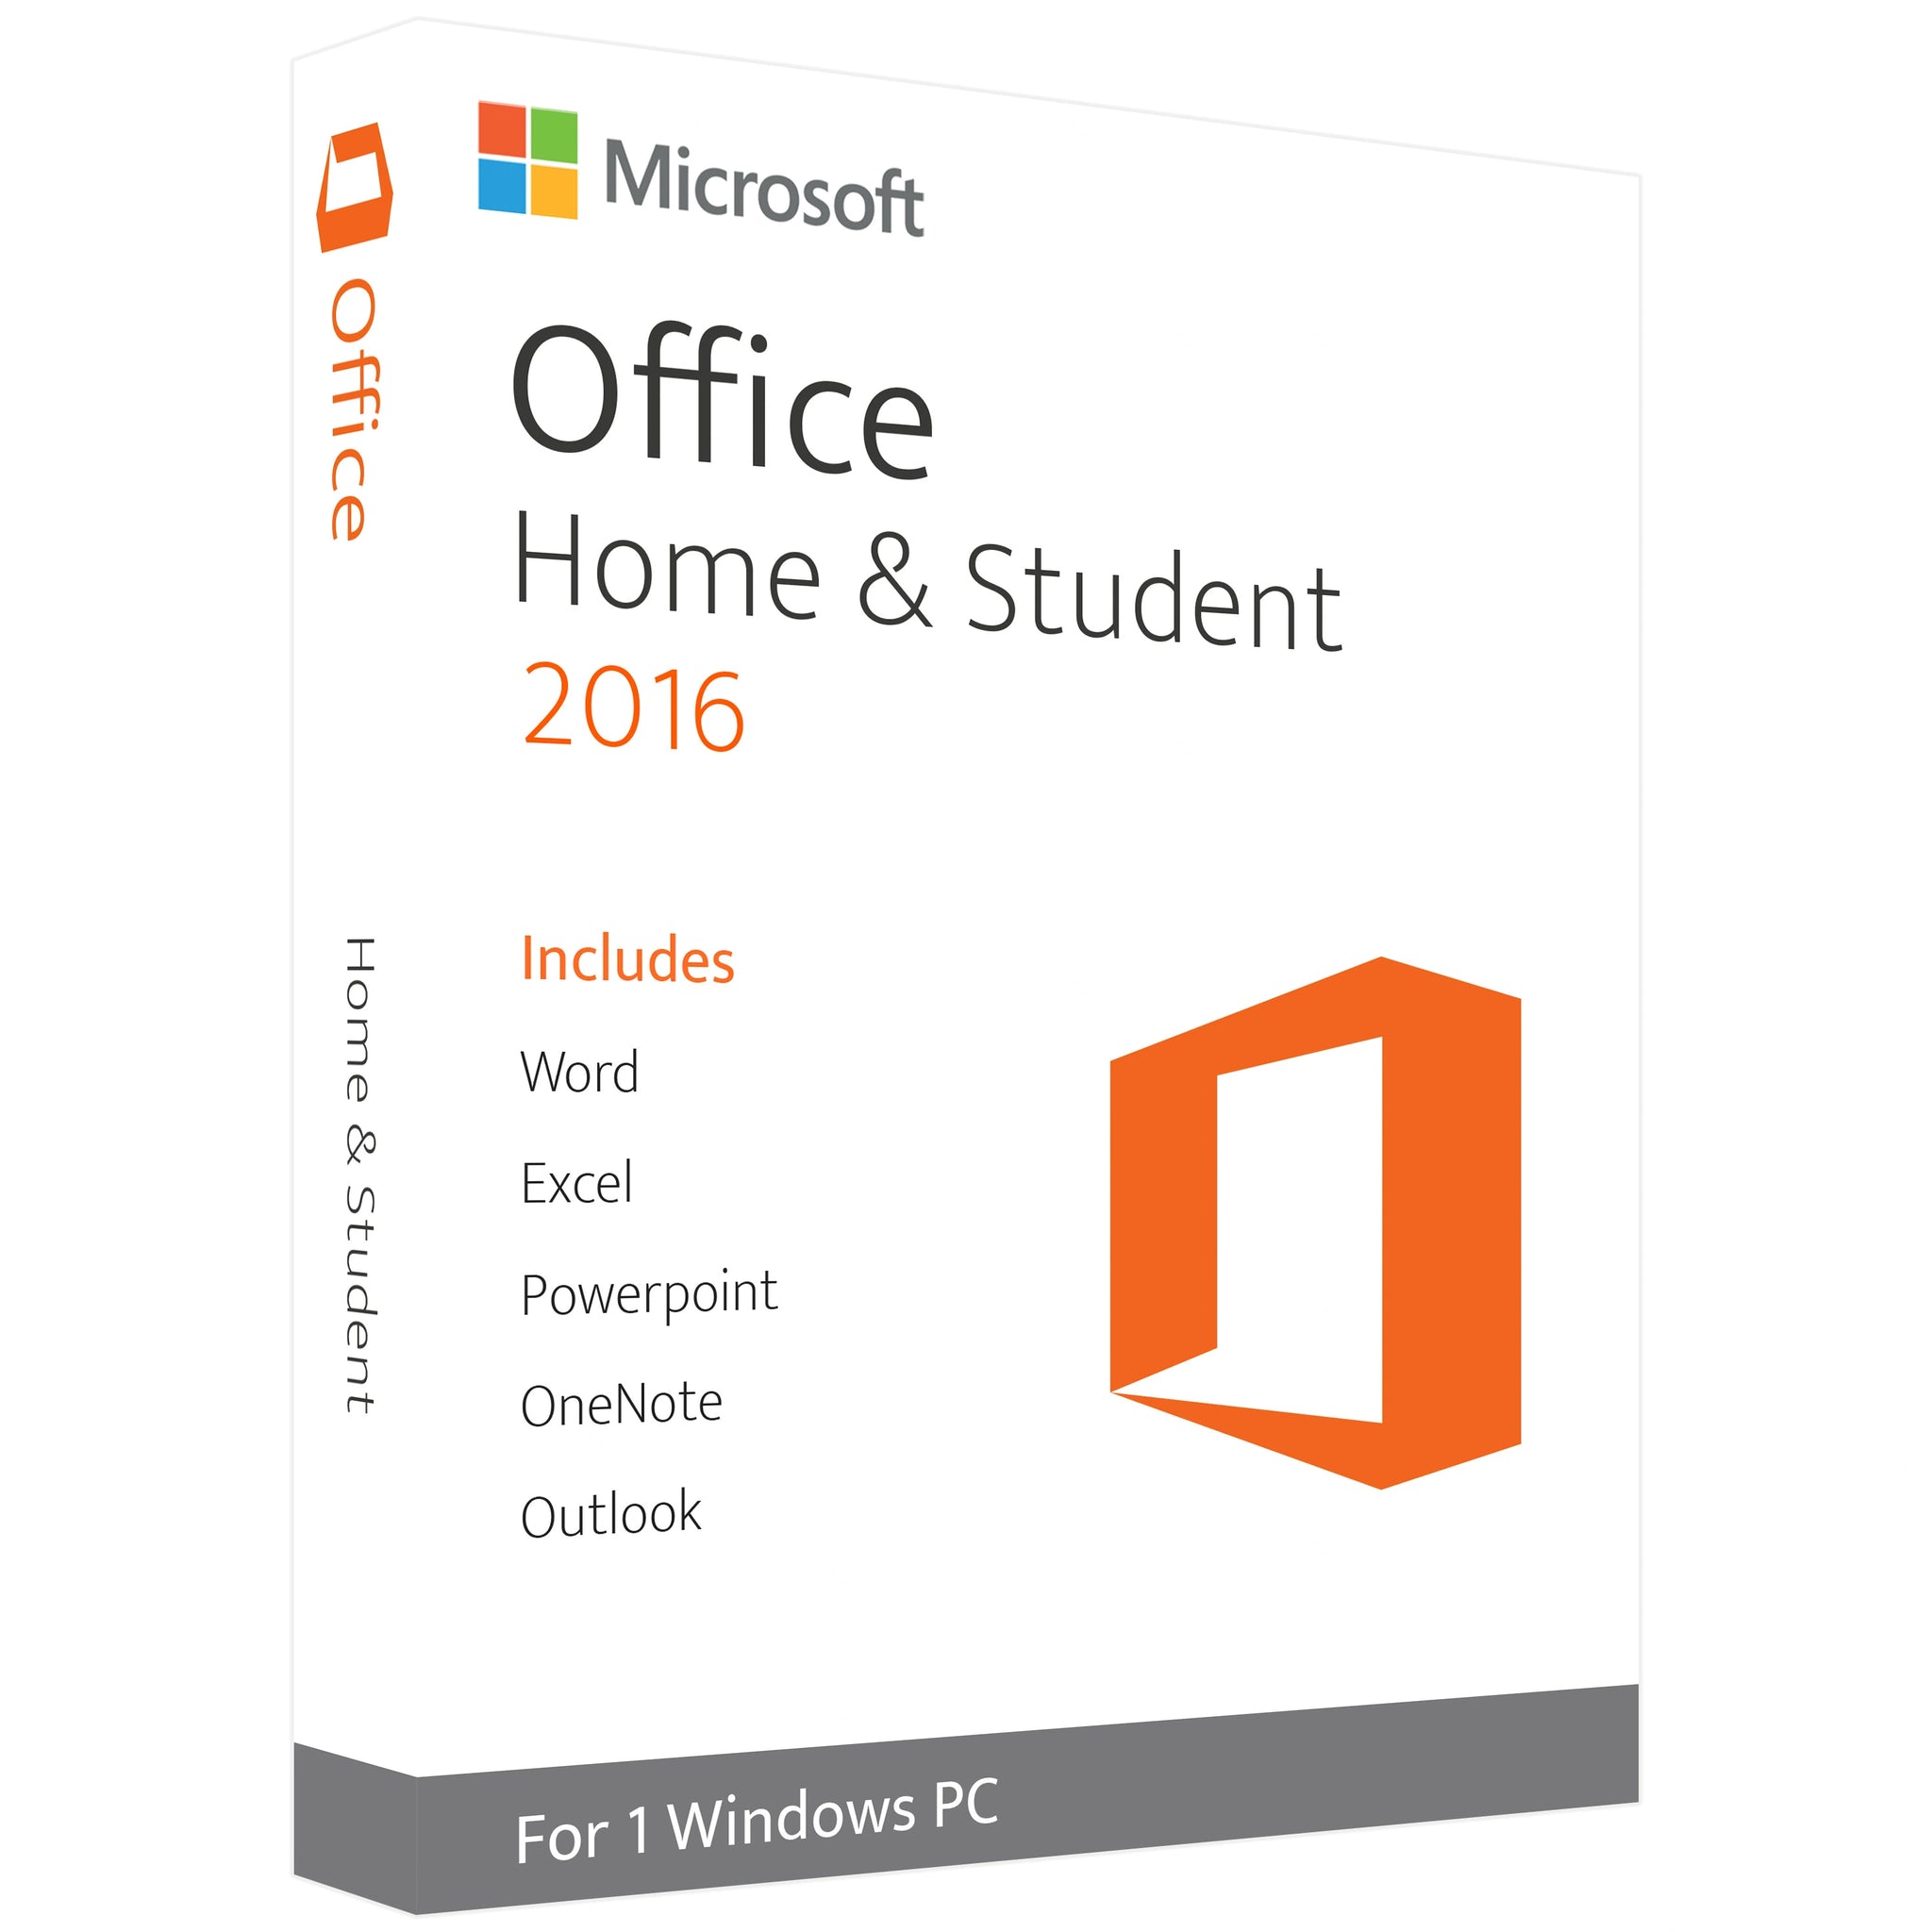 Microsoft office 2016 Home & Student - Lifetime License Key for 1 PC